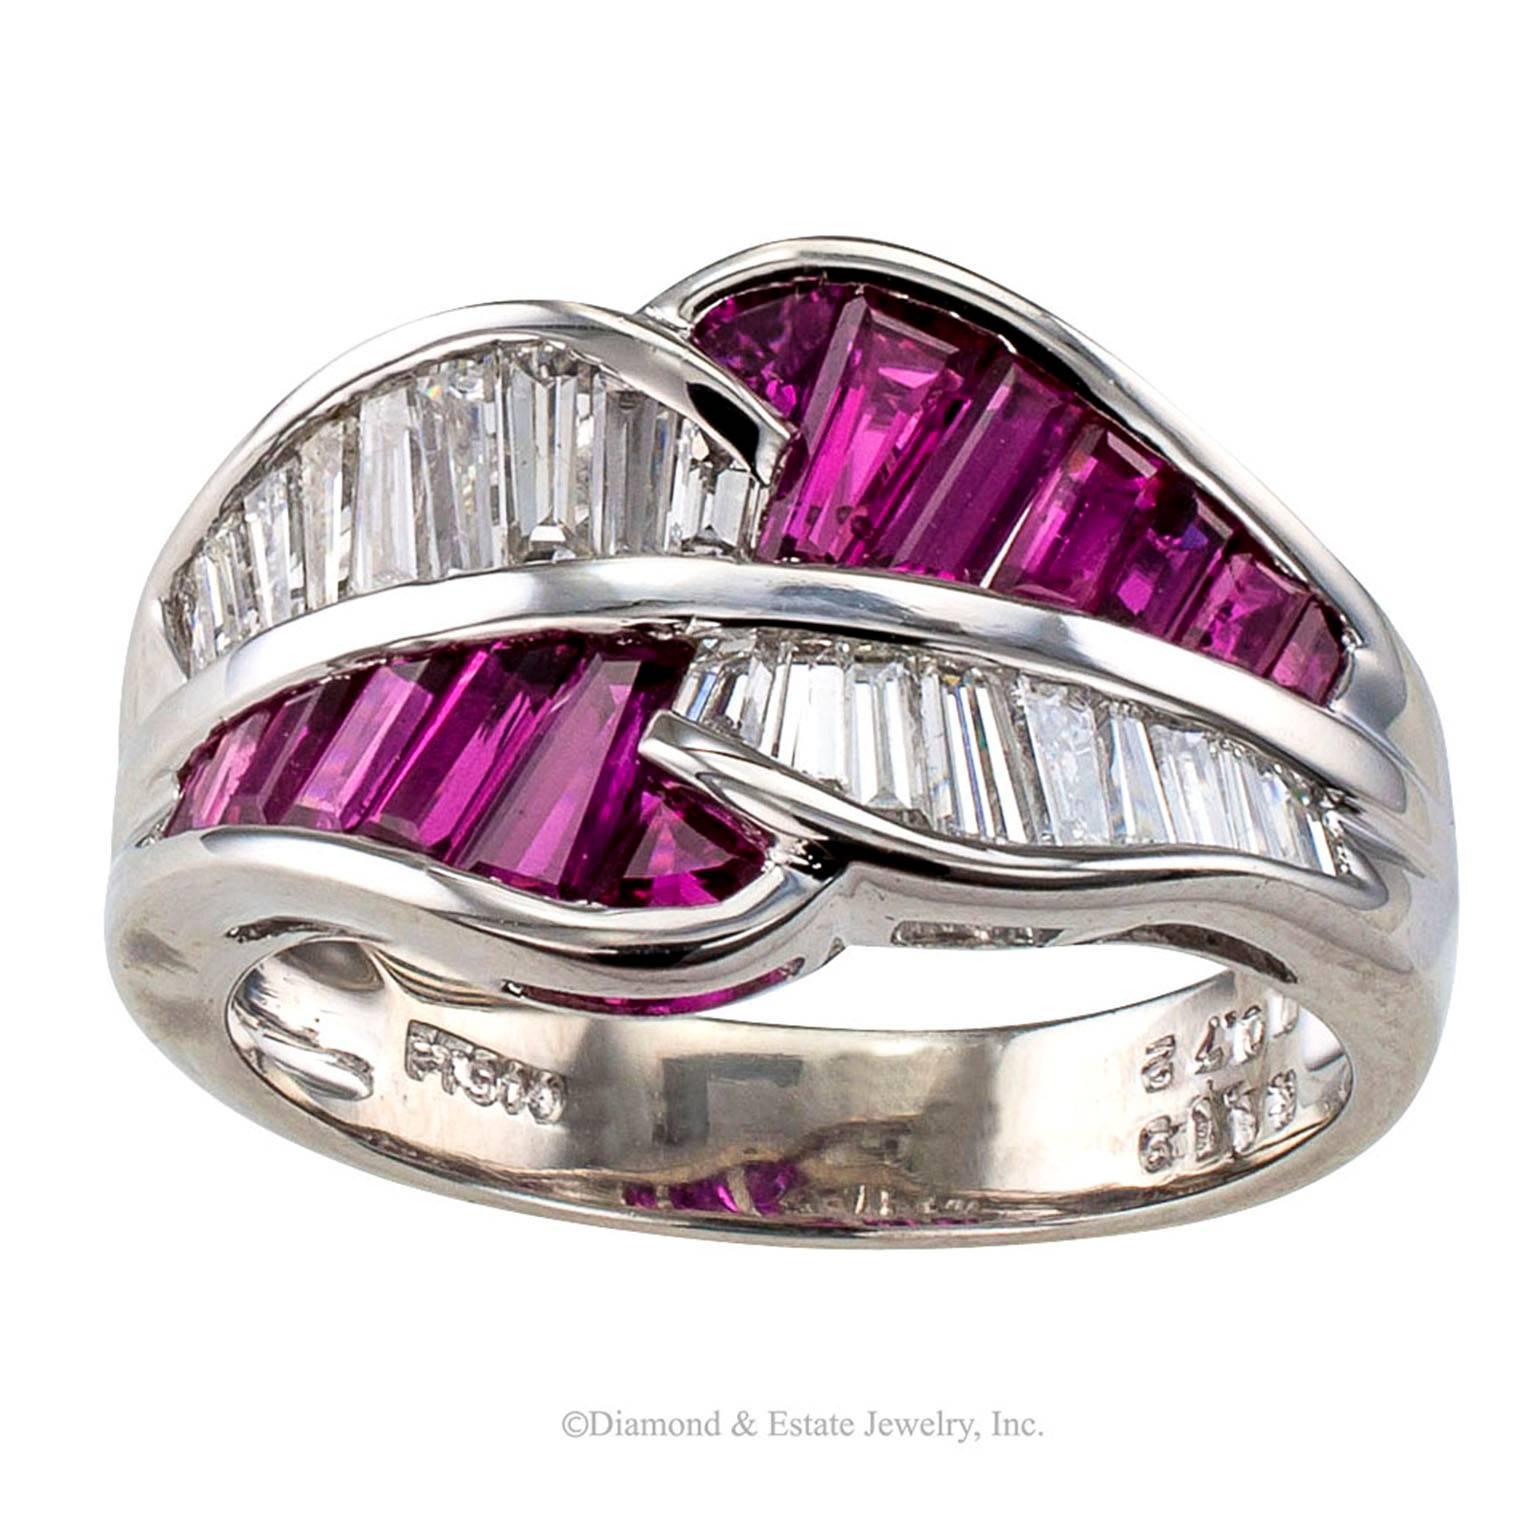 Baguette Ruby Diamond Bypass Platinum Ring Band

Bypass 1.19 carats rubies and 0.72 carat diamonds platinum ring band circa 1990.  Stone weights are engraved inside the ring's shank.  The retro inspired bypass design has an eye catching color play